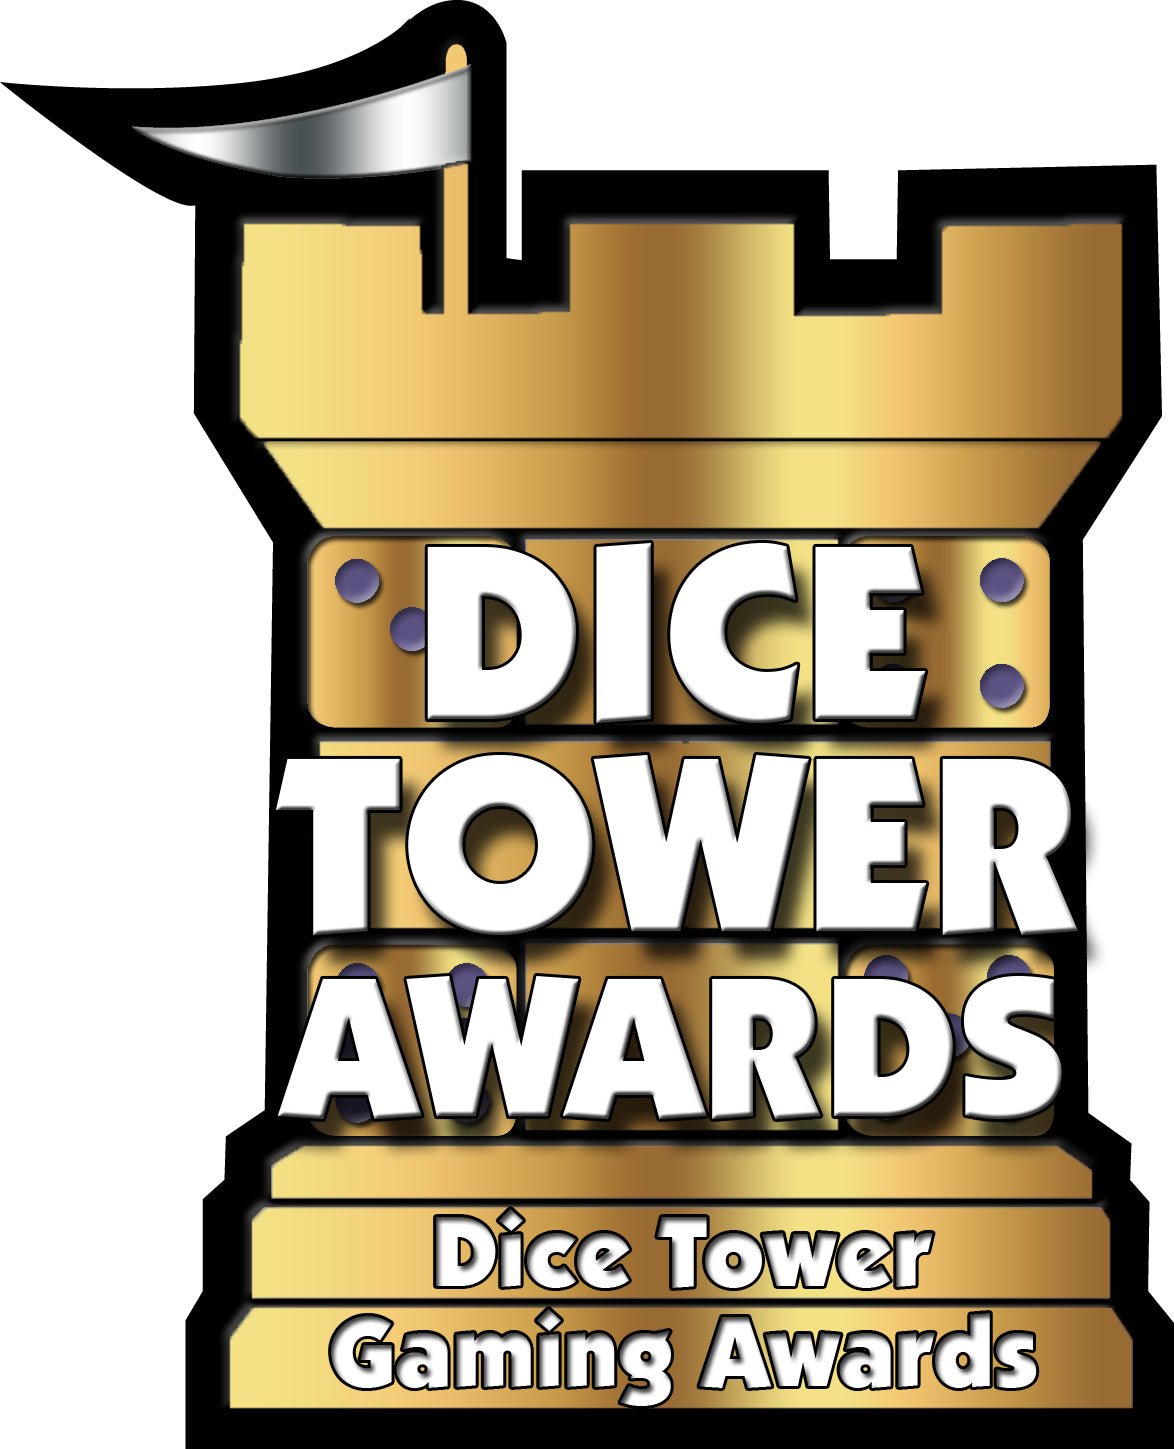 Dice Tower Awards - Gaming Library